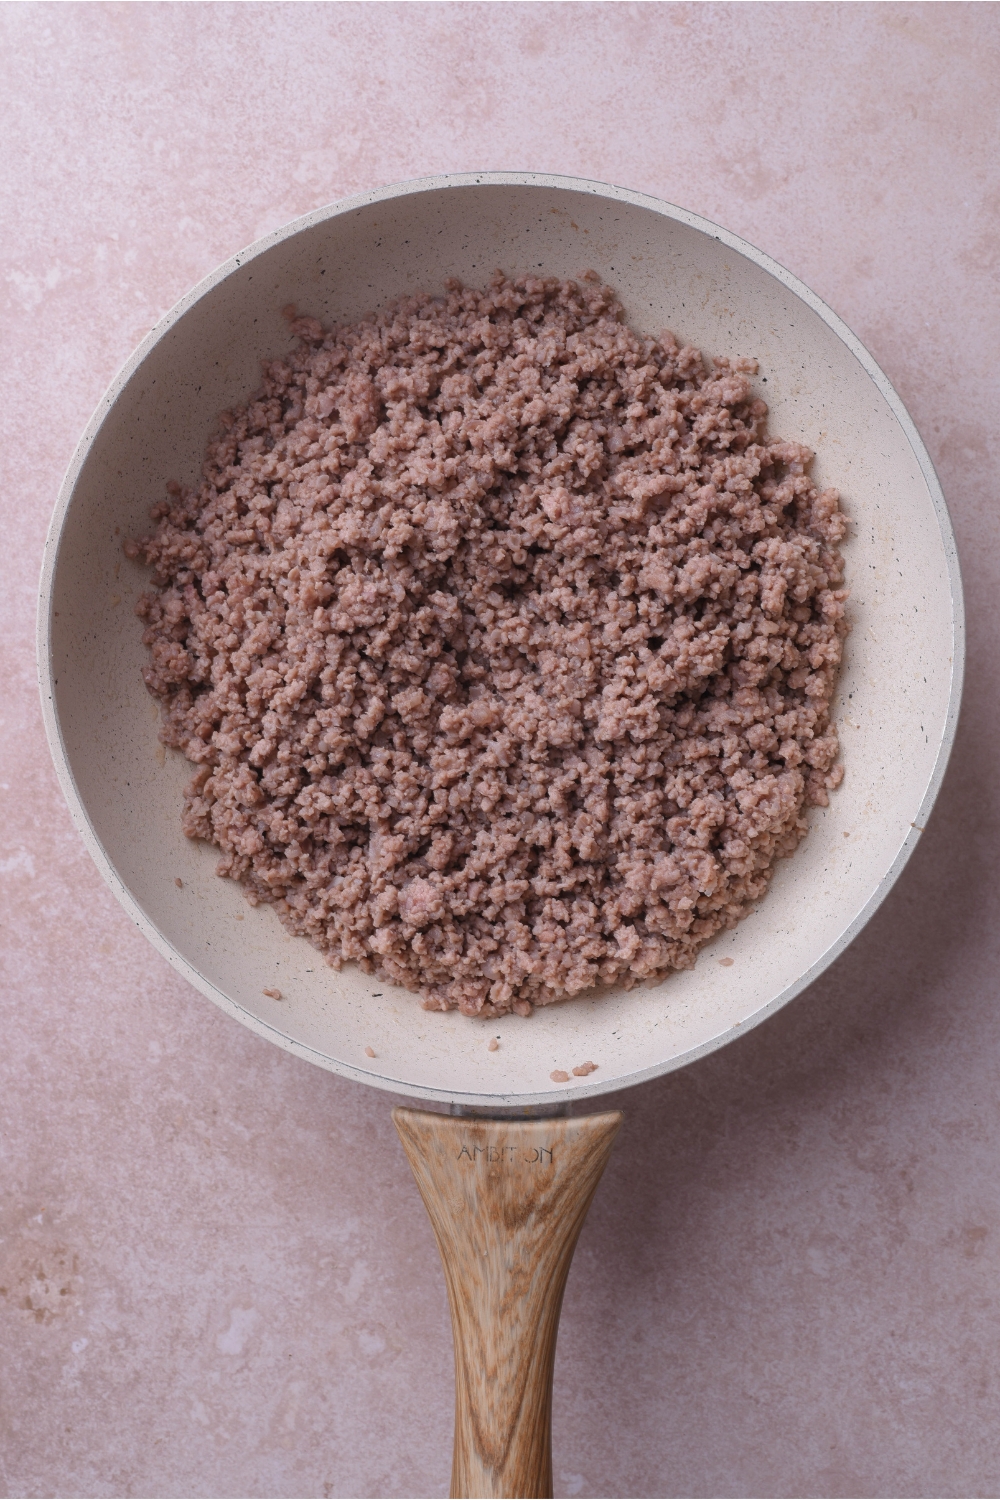 A grey skillet filled with cooked ground beef.